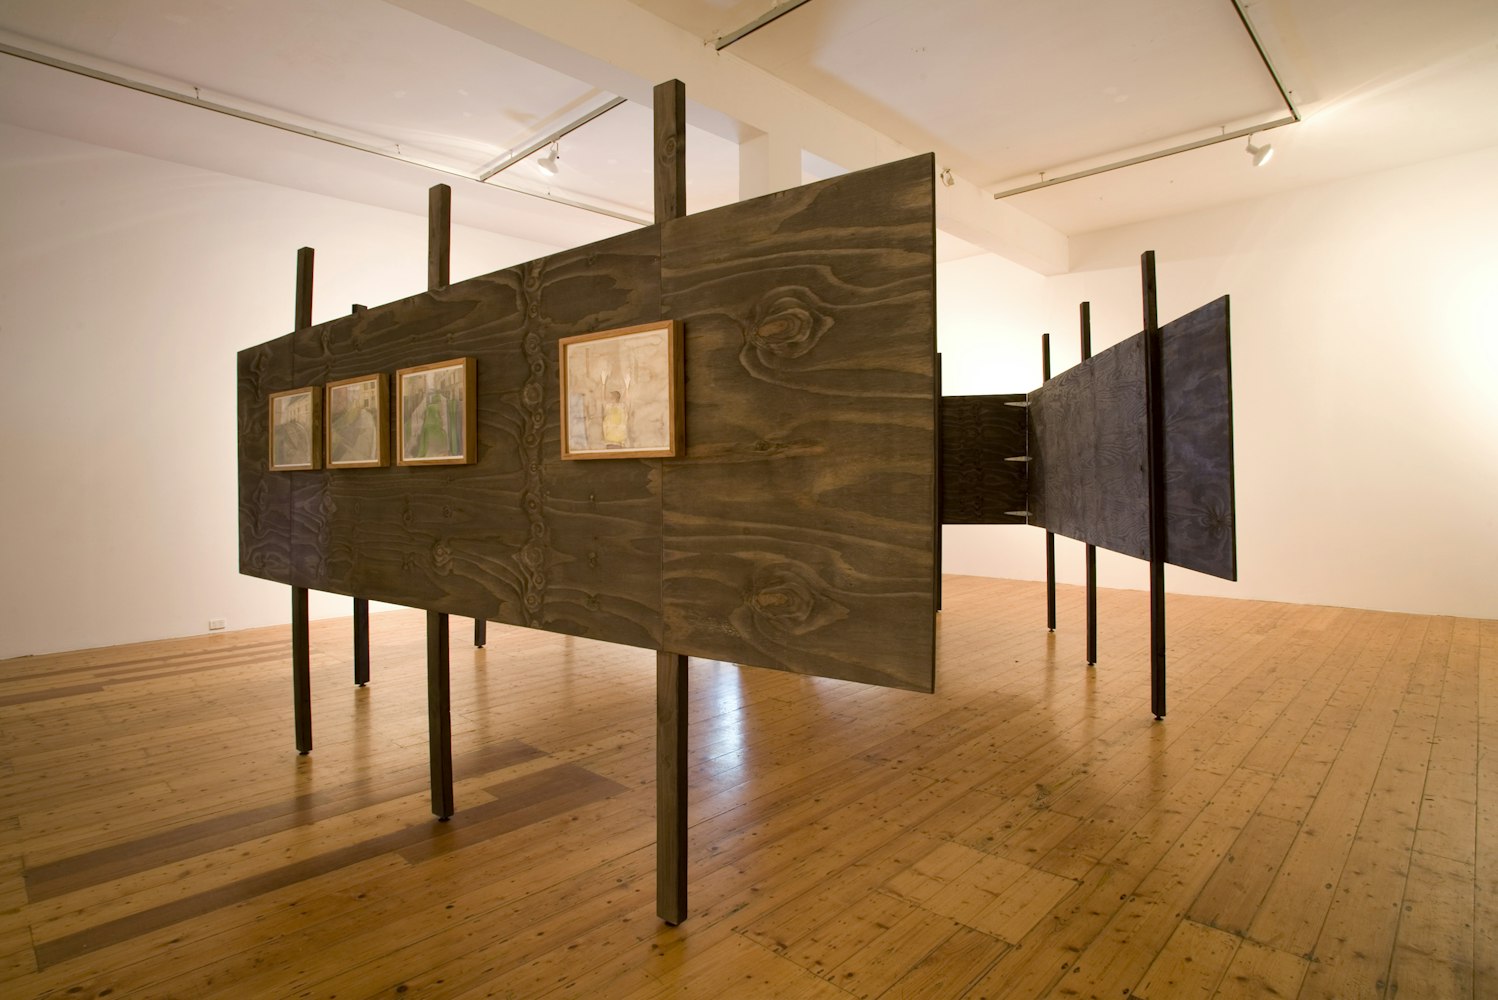 Michelle Ussher, Present Elsewhere, Gertrude Contemporary, 2008.